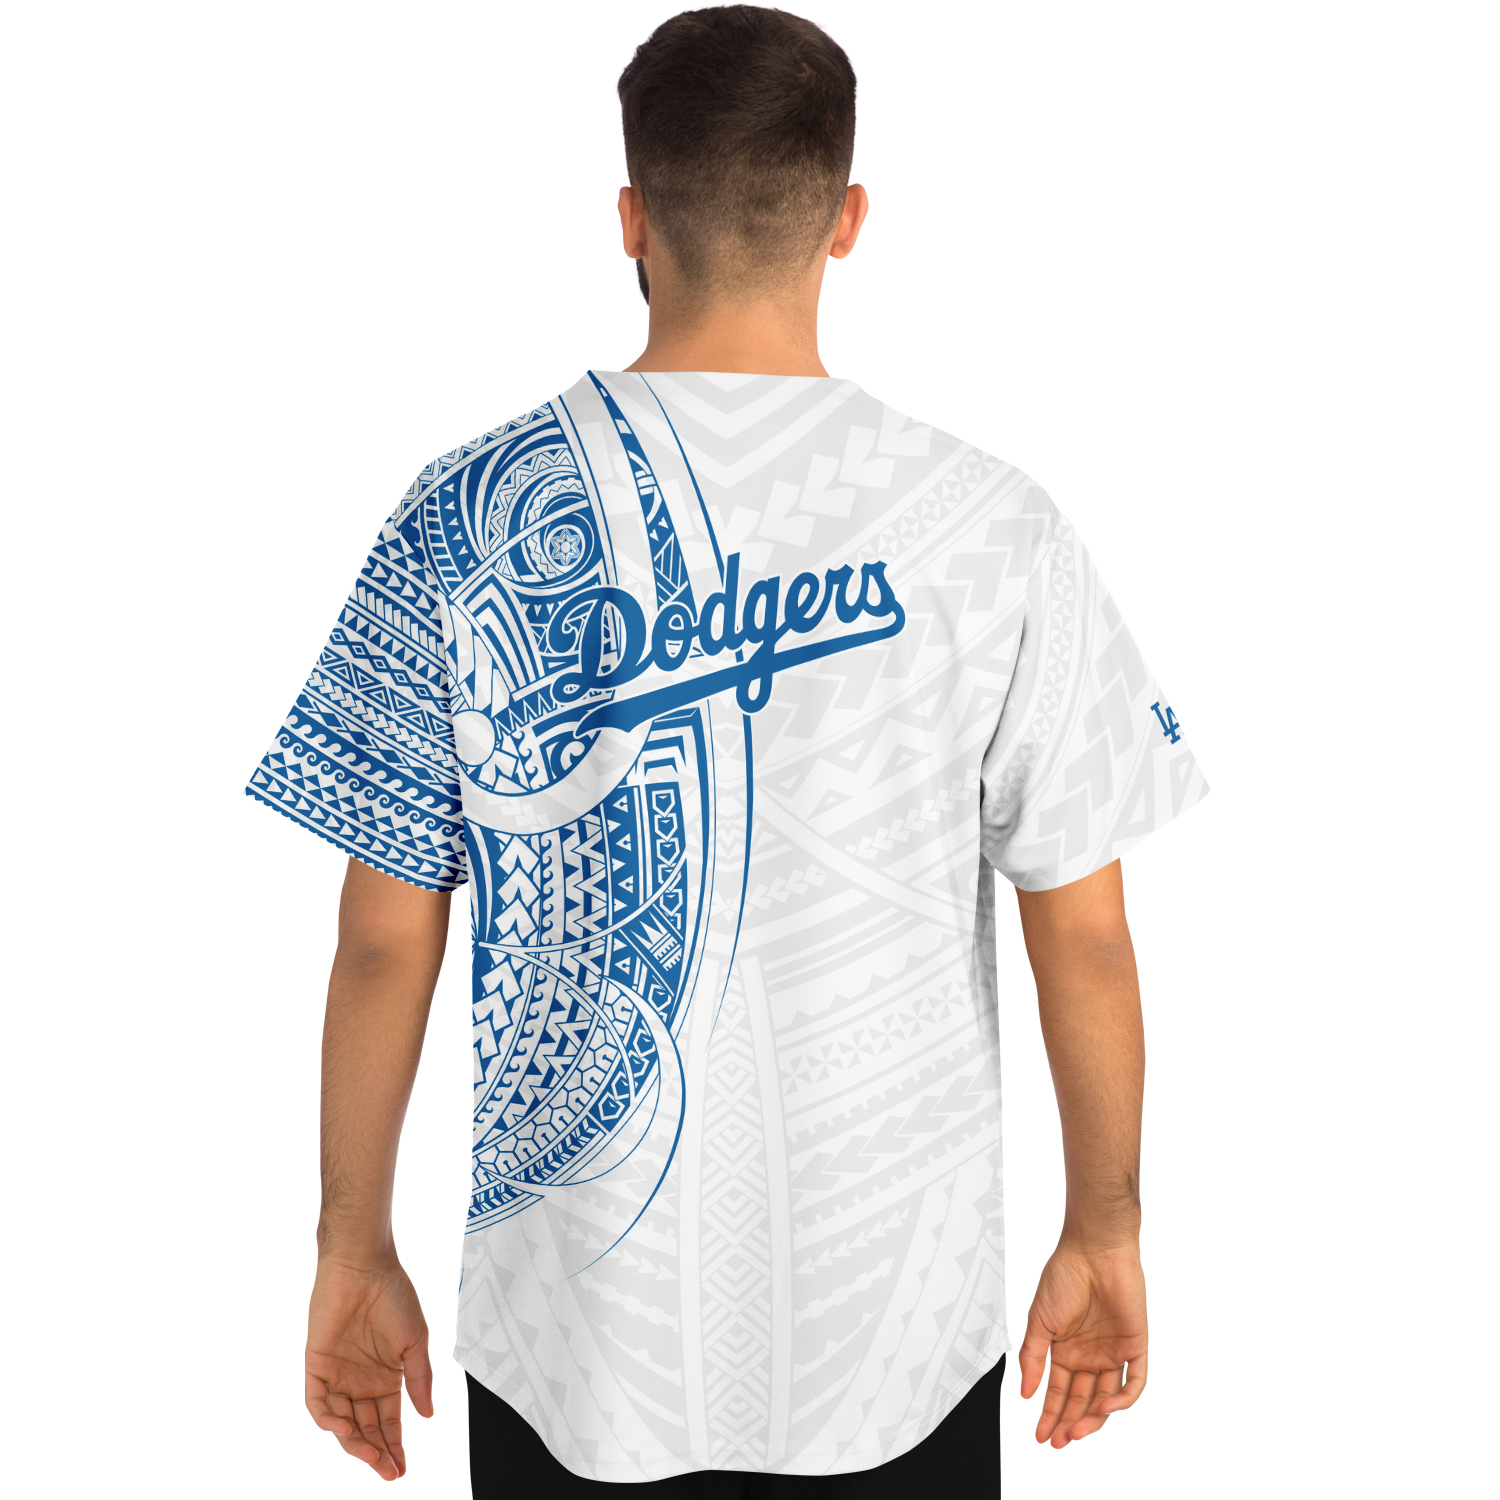 dodgers special edition jersey